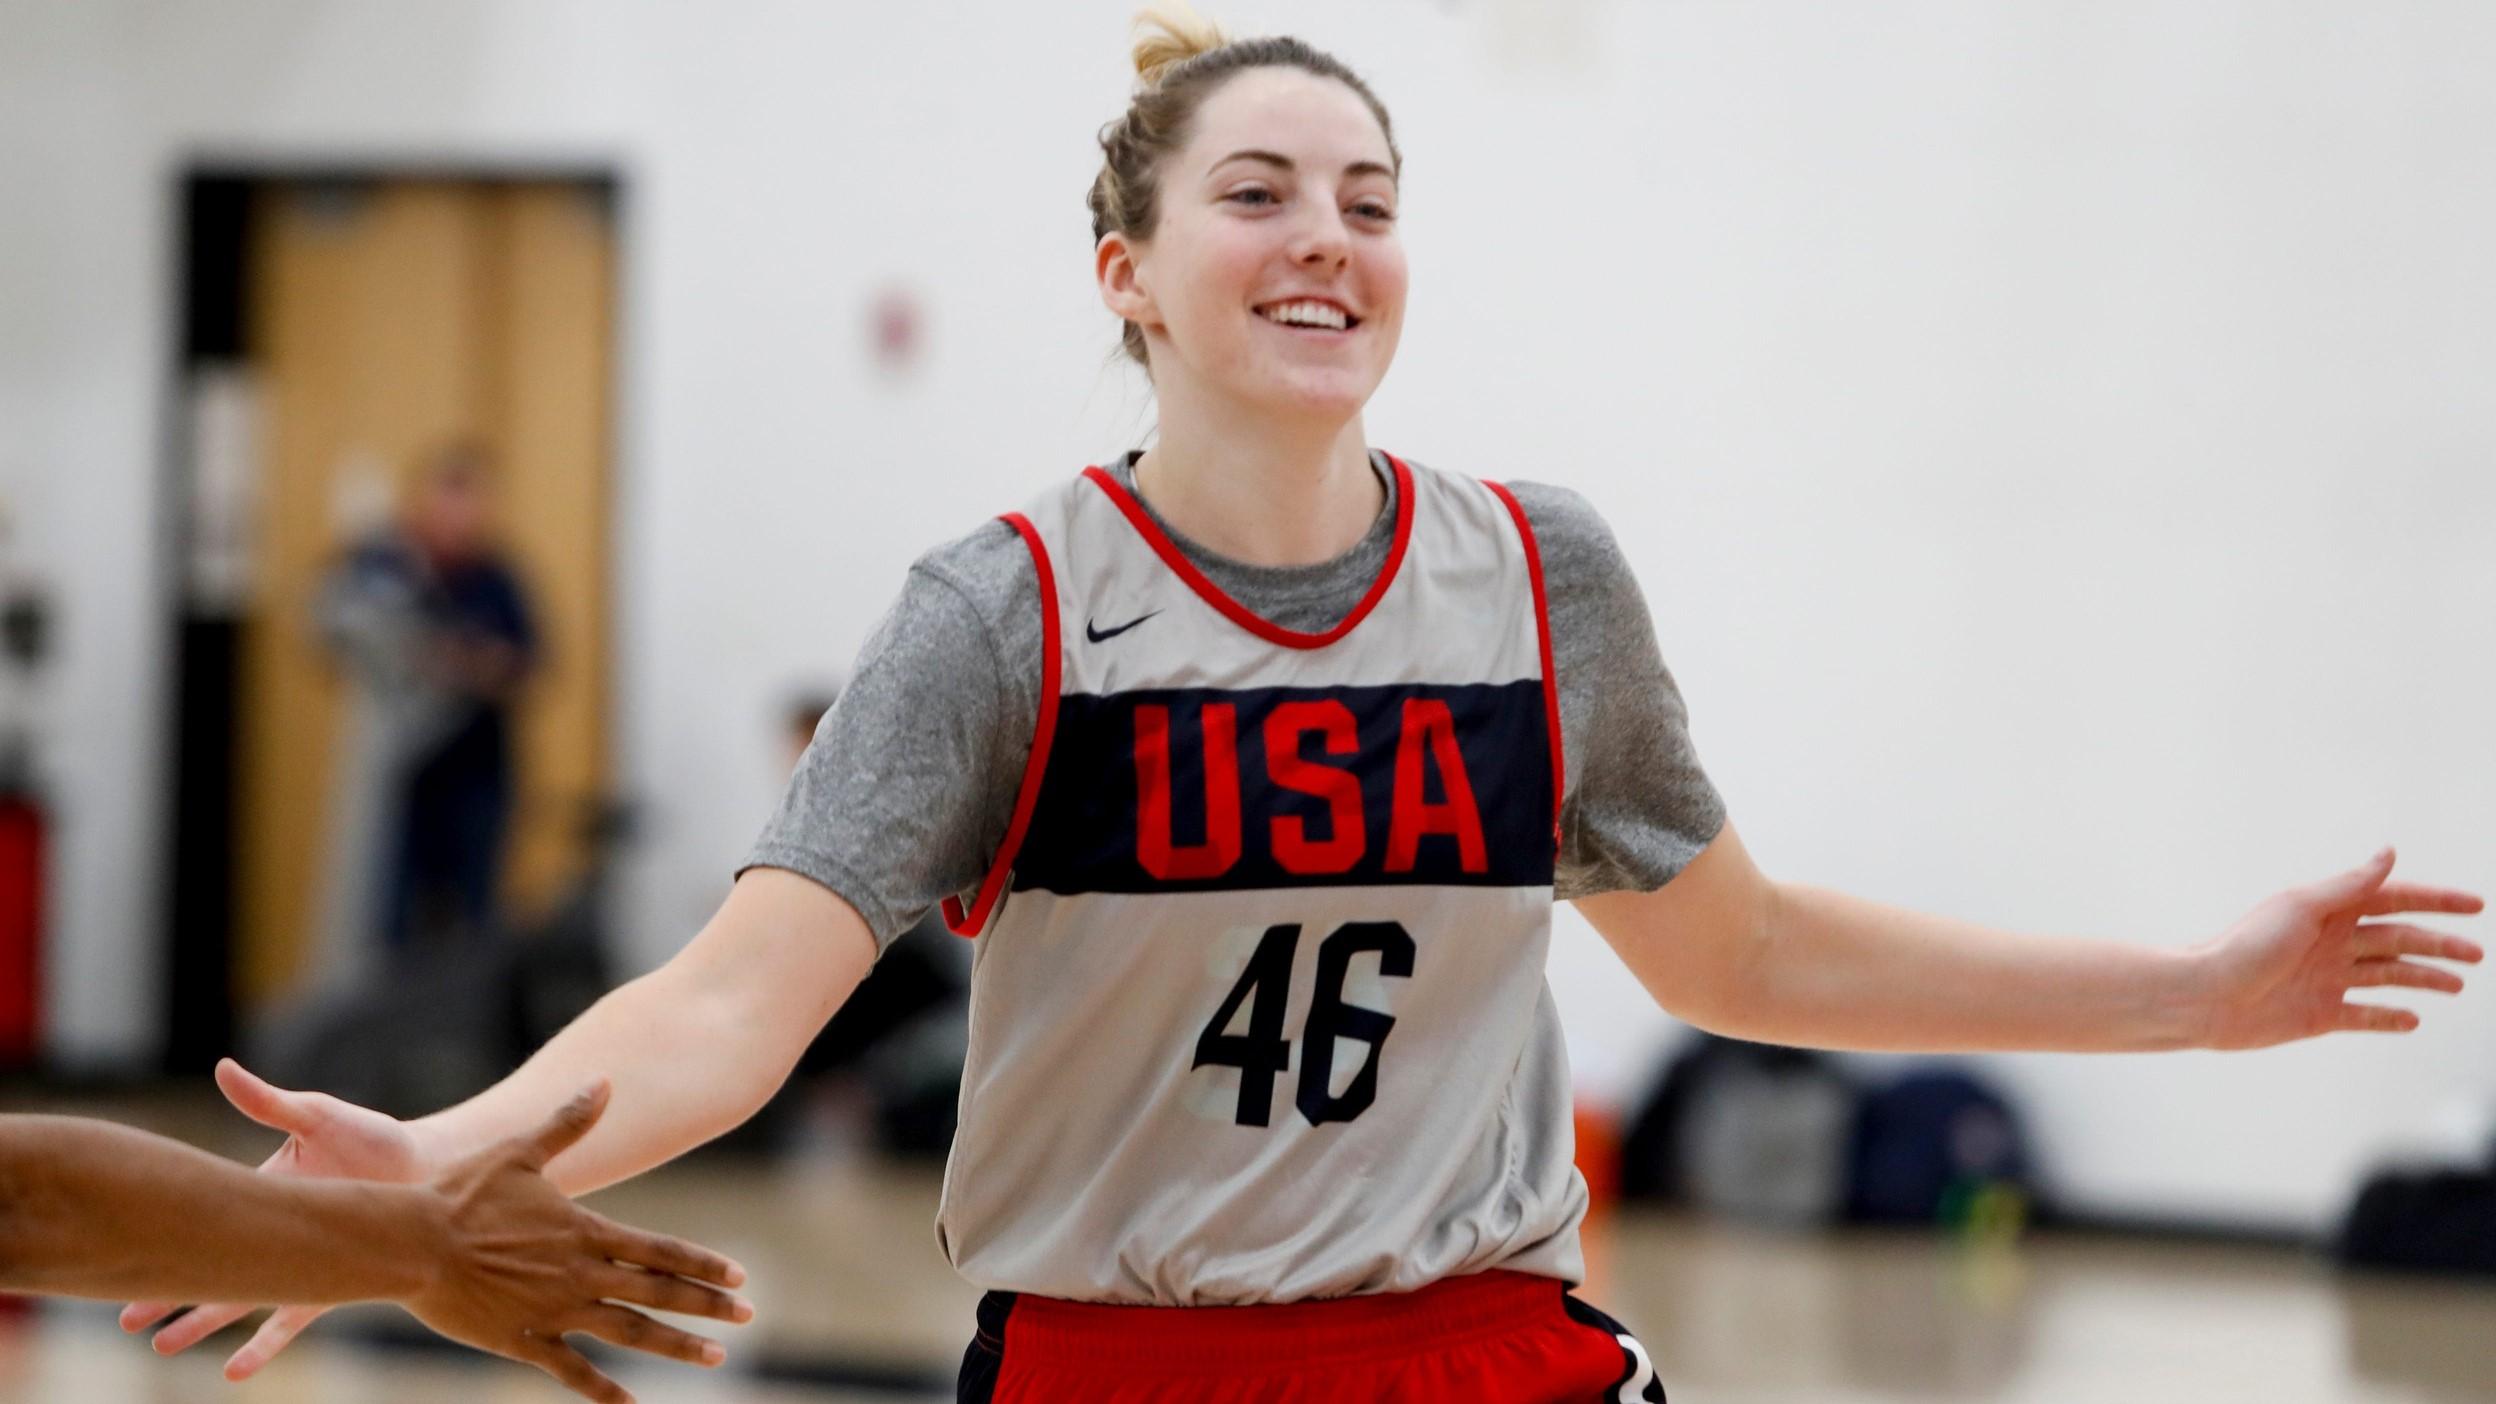 USA Basketball Women's National Team's Katie Lou Samuelson celebrates with her teammates during practice on campus on Jan. 31, 2020. / Scott Utterback-Louisville Courier Journal via Imagn Content Services, LLC